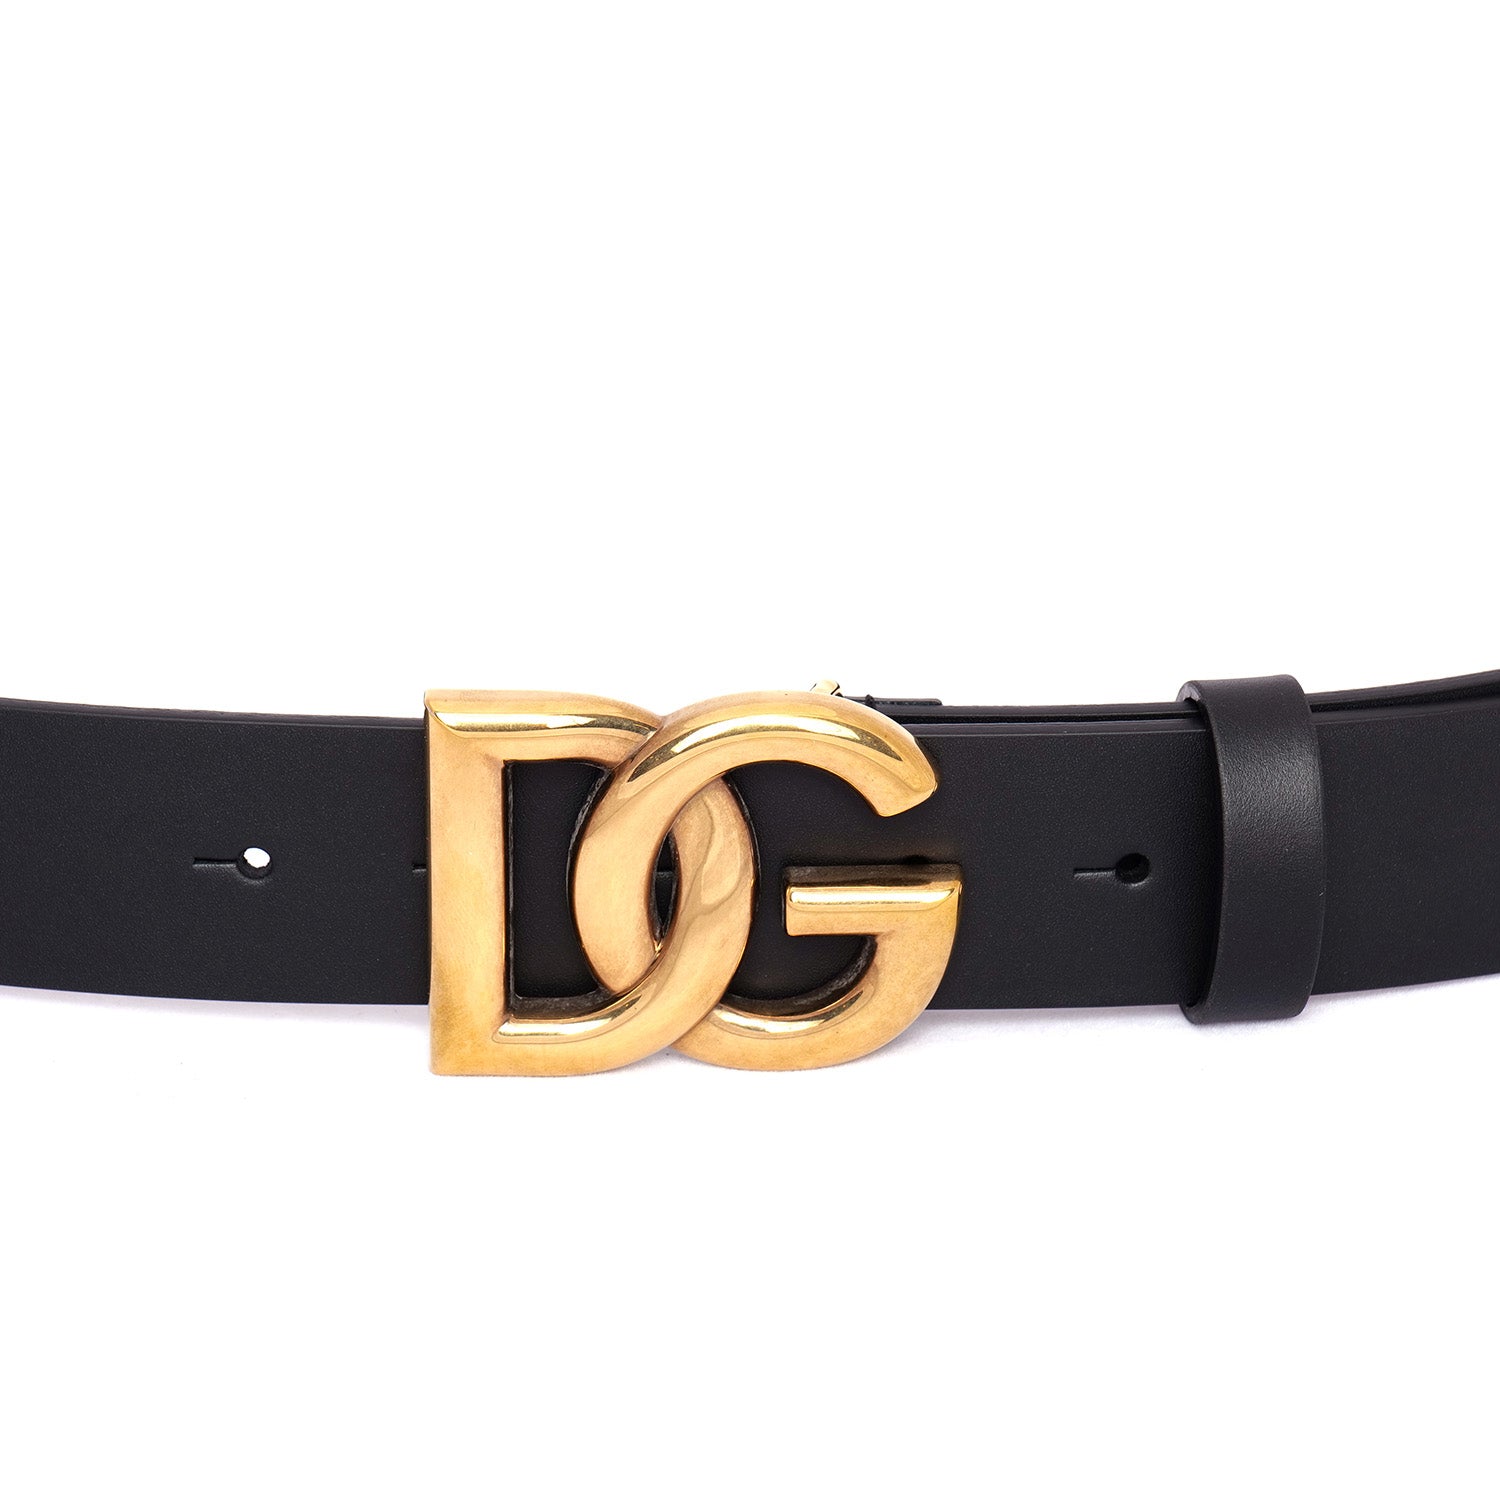 Belt With Logo Tag by Dolce & Gabbana Kids at ORCHARD MILE